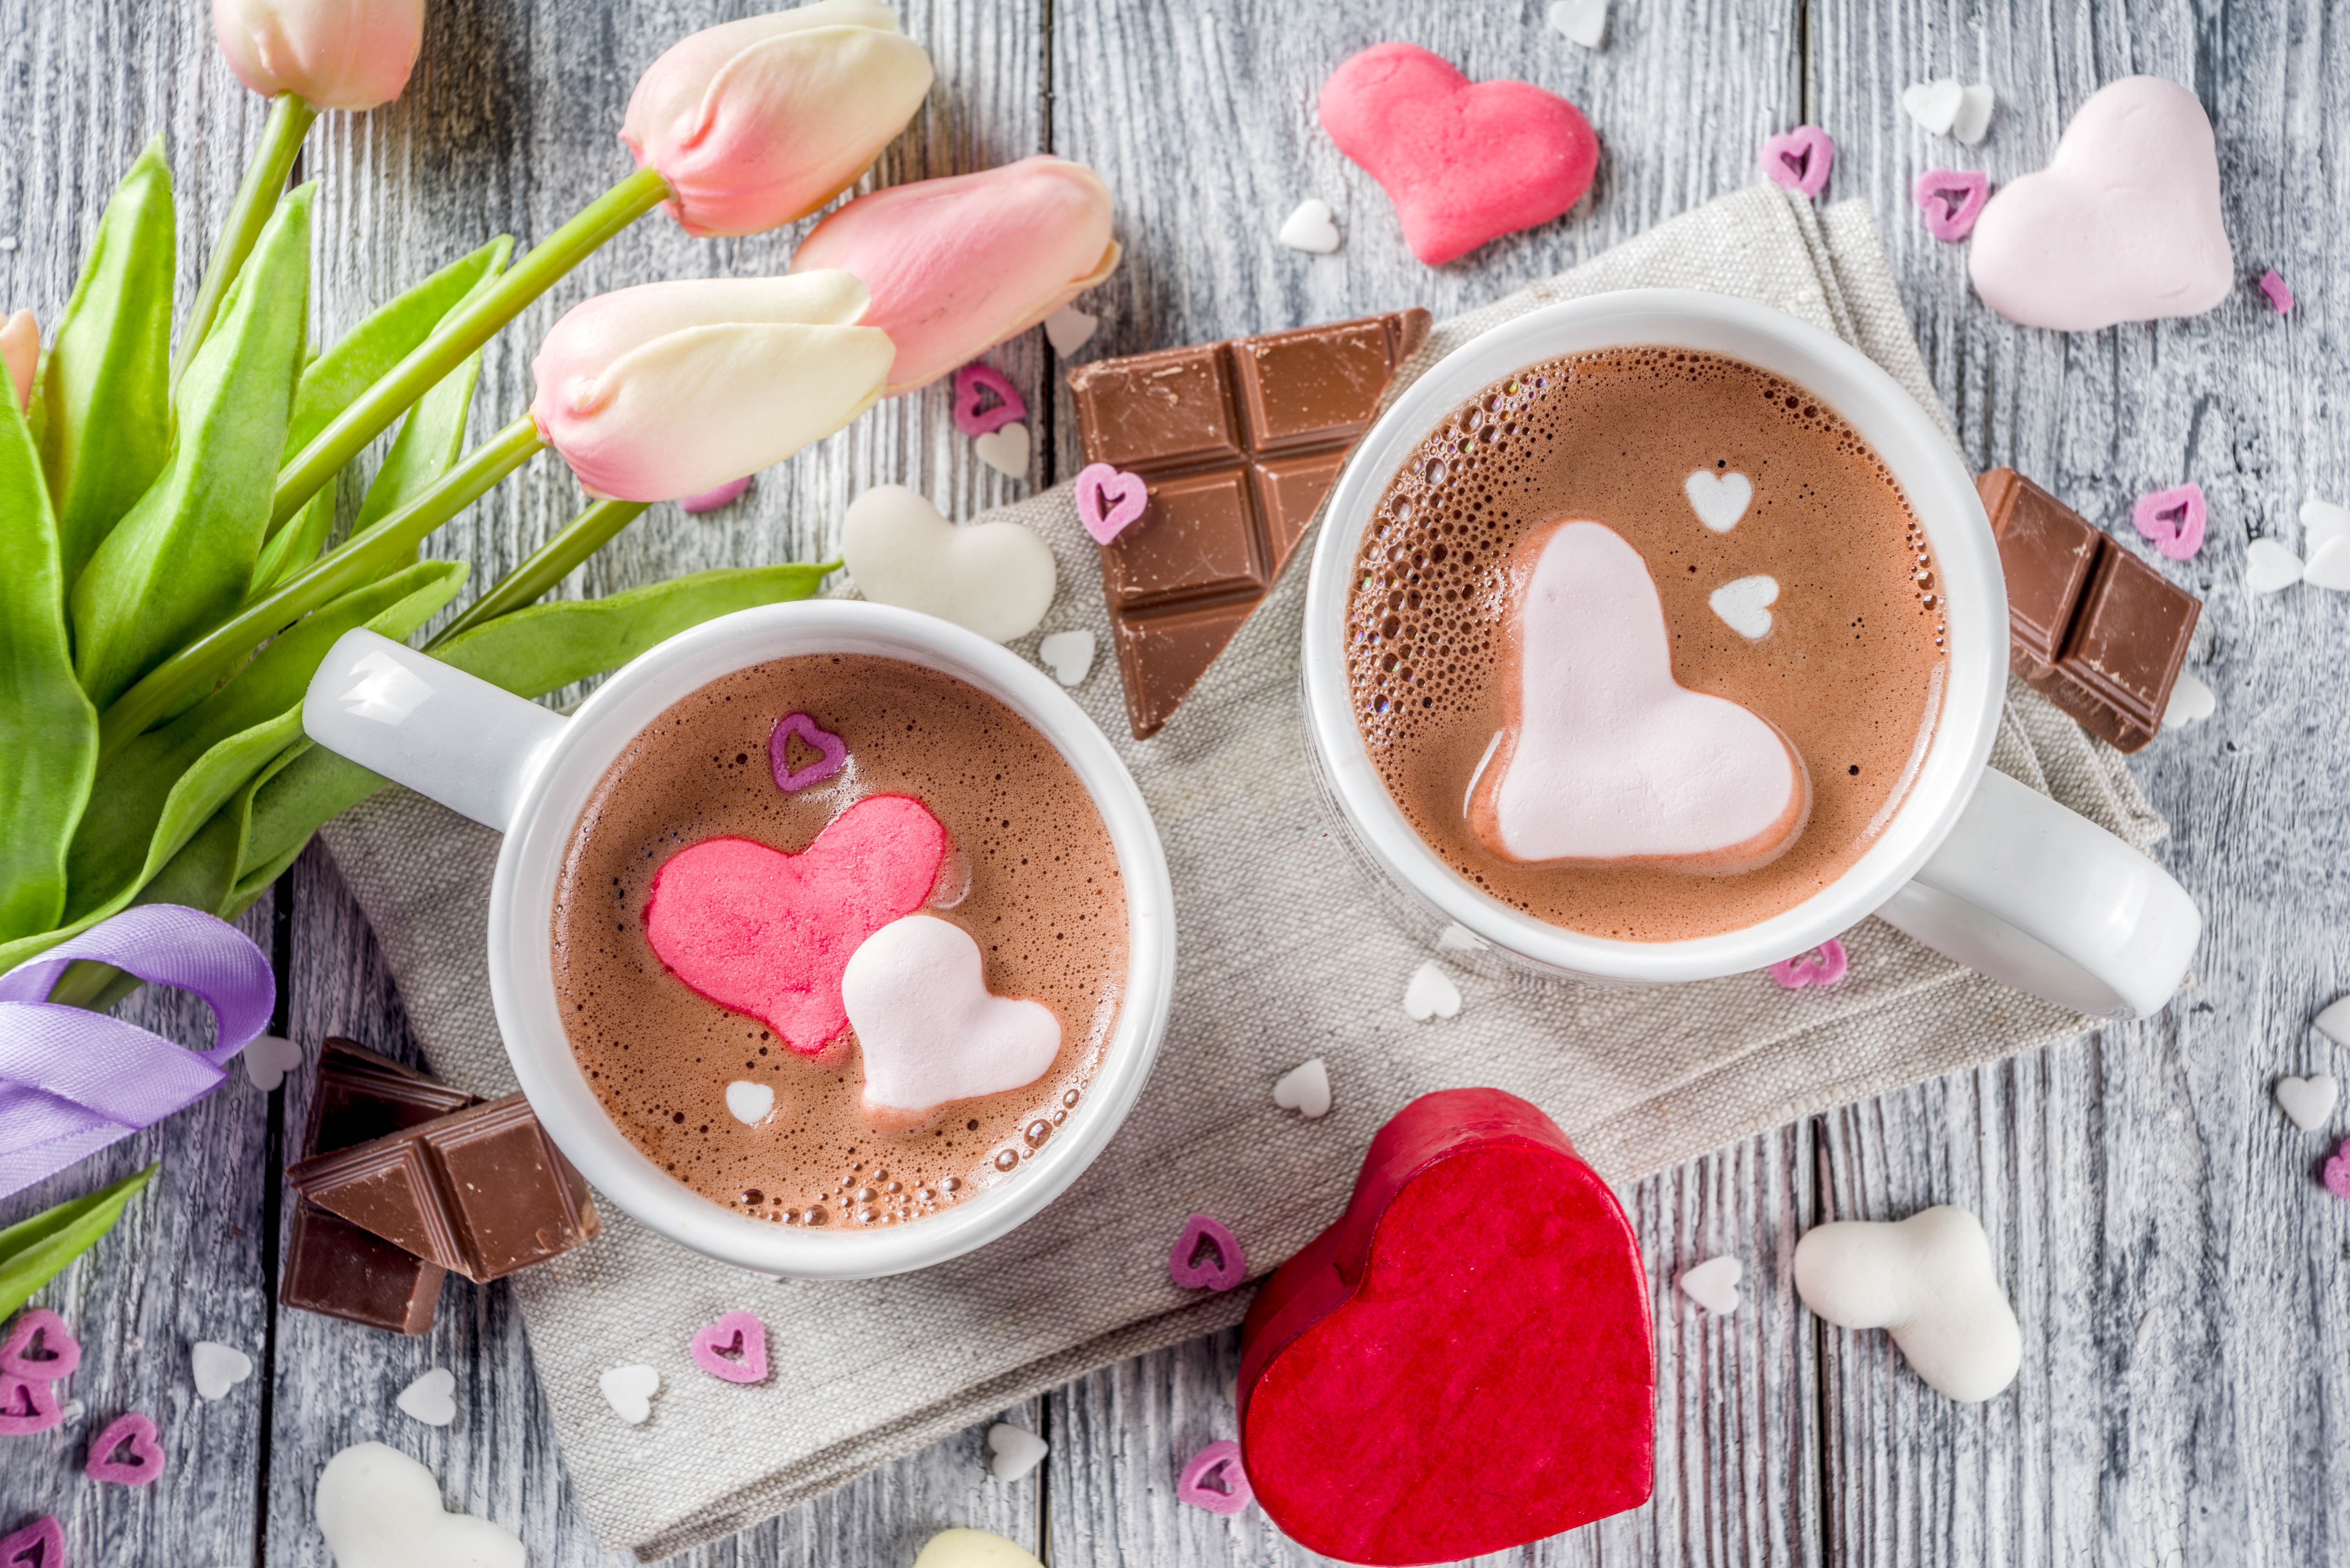 Flower Cup Tulip Drink Chocolate 7360x4912